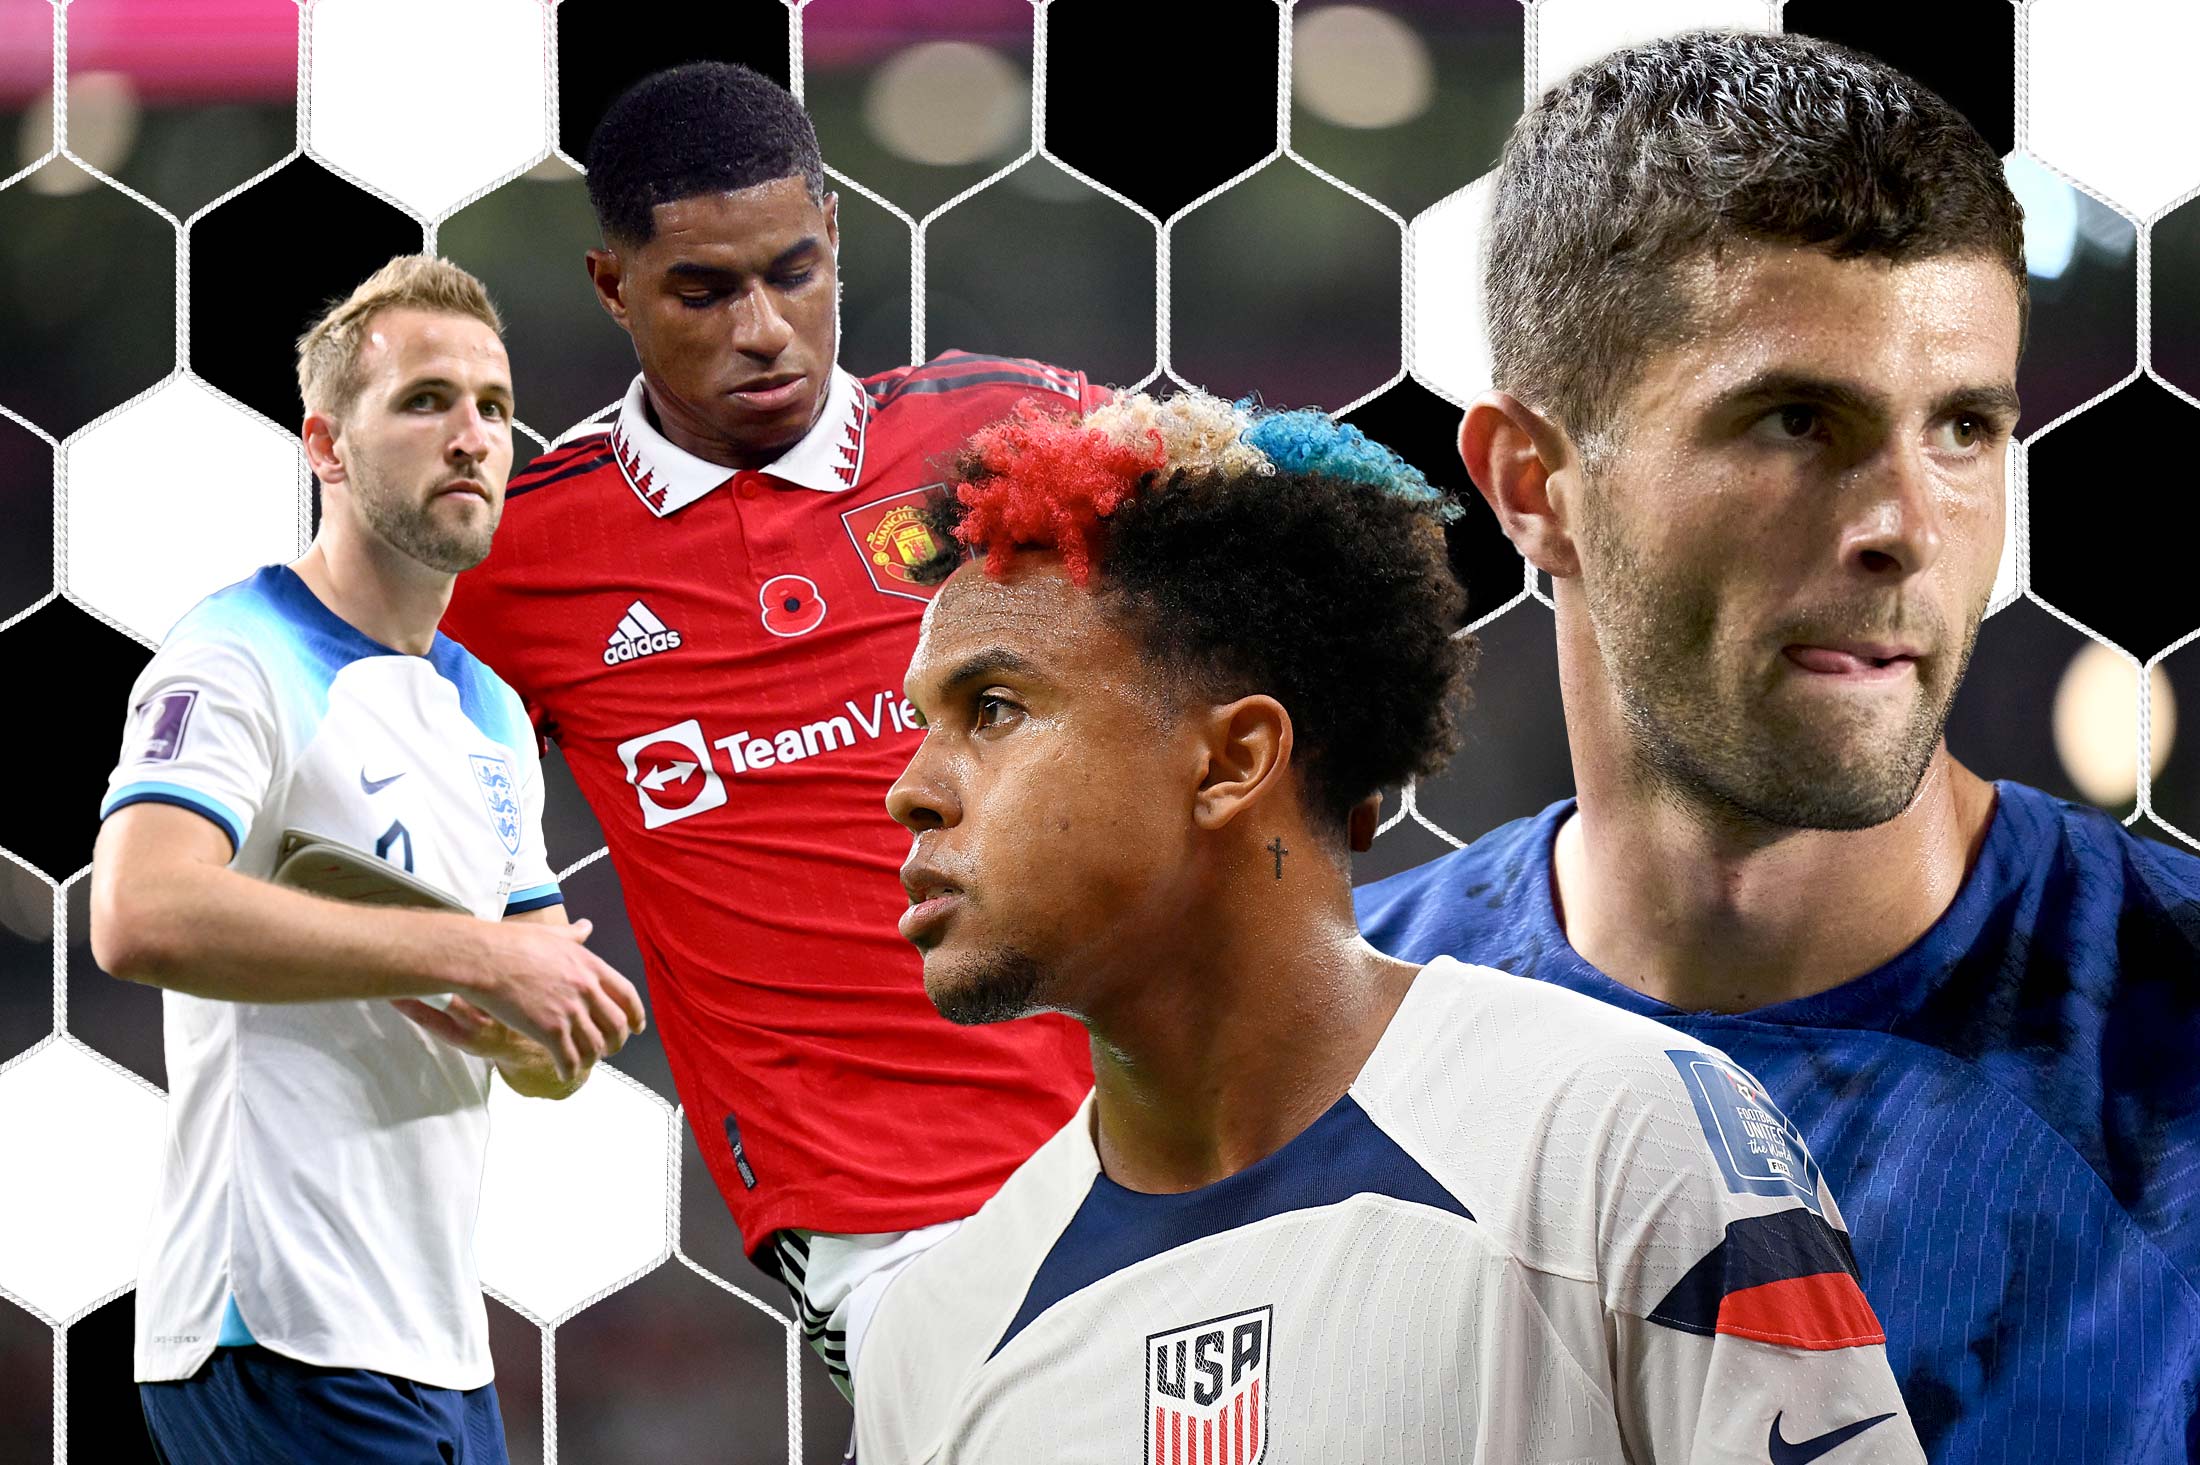 Harry Kane, Marcus Rashford, Weston McKennie, and Christian Pulisic in a collage, with the octagonal grid of a soccer net illustrated in a scrim behind them